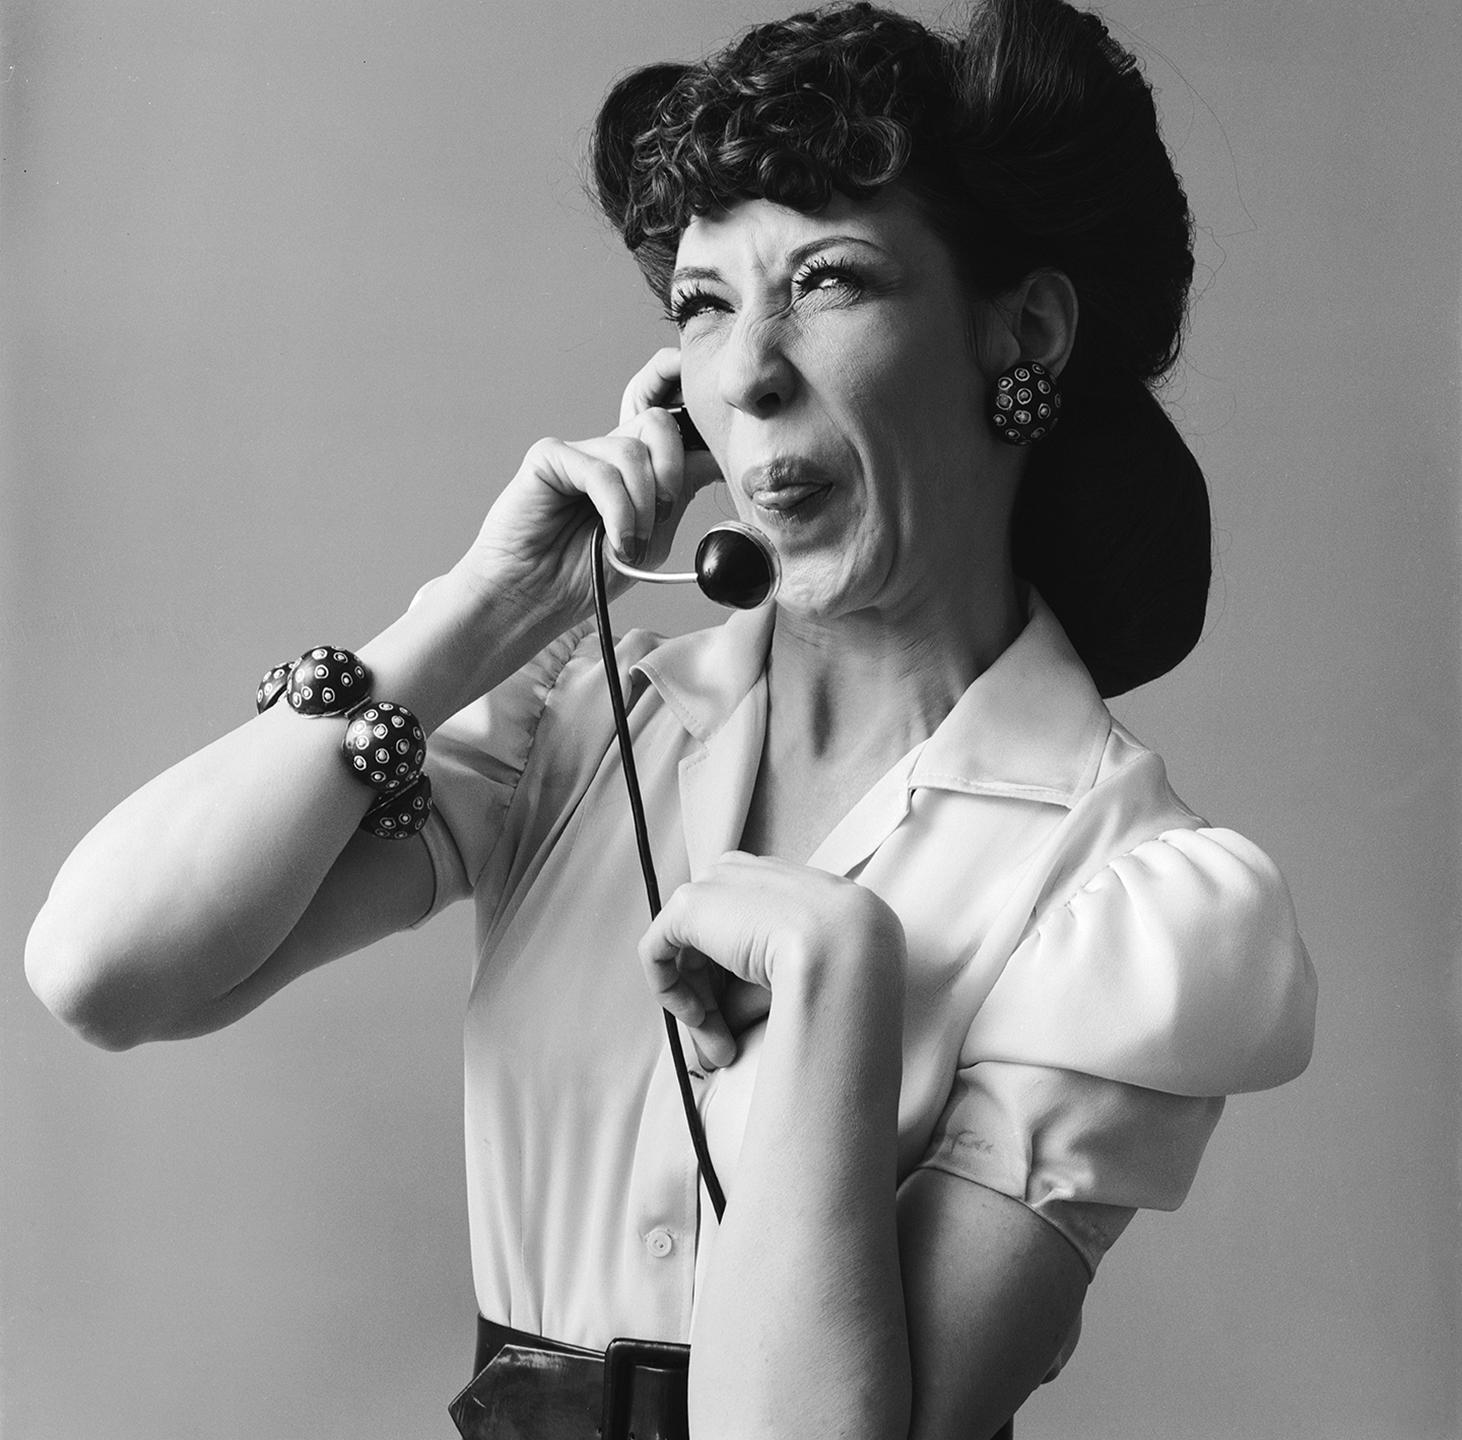 Jack Robinson Black and White Photograph - Lily Tomlin as "Ernestine"